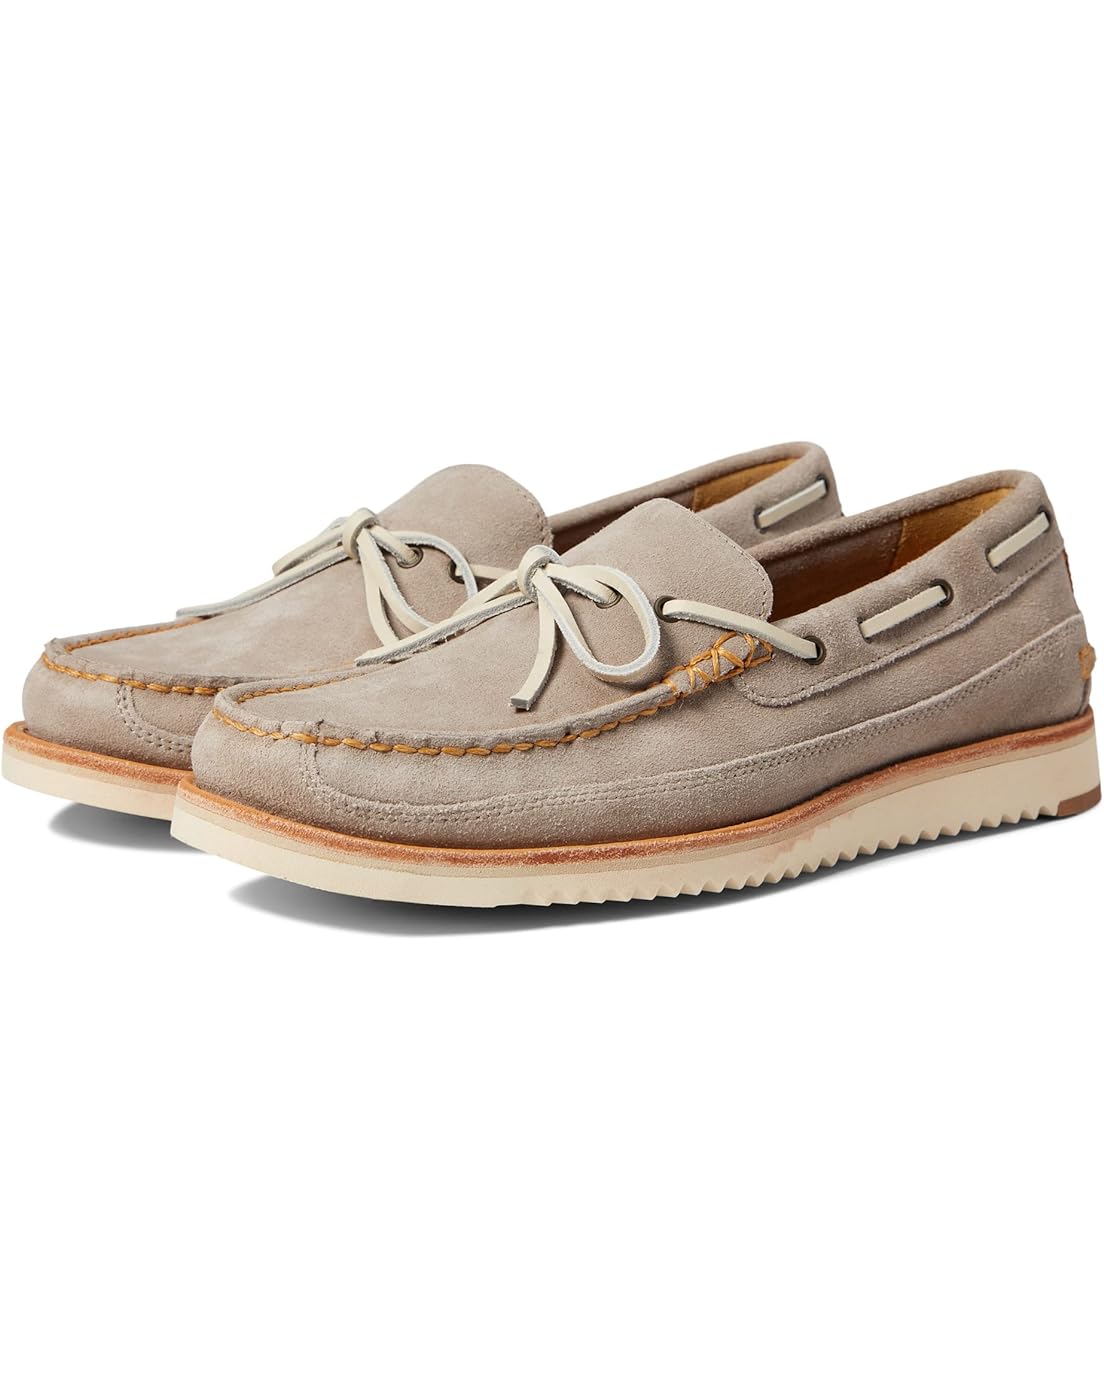 Cole Haan Pinch Rugged Camp Moccasin Loafer